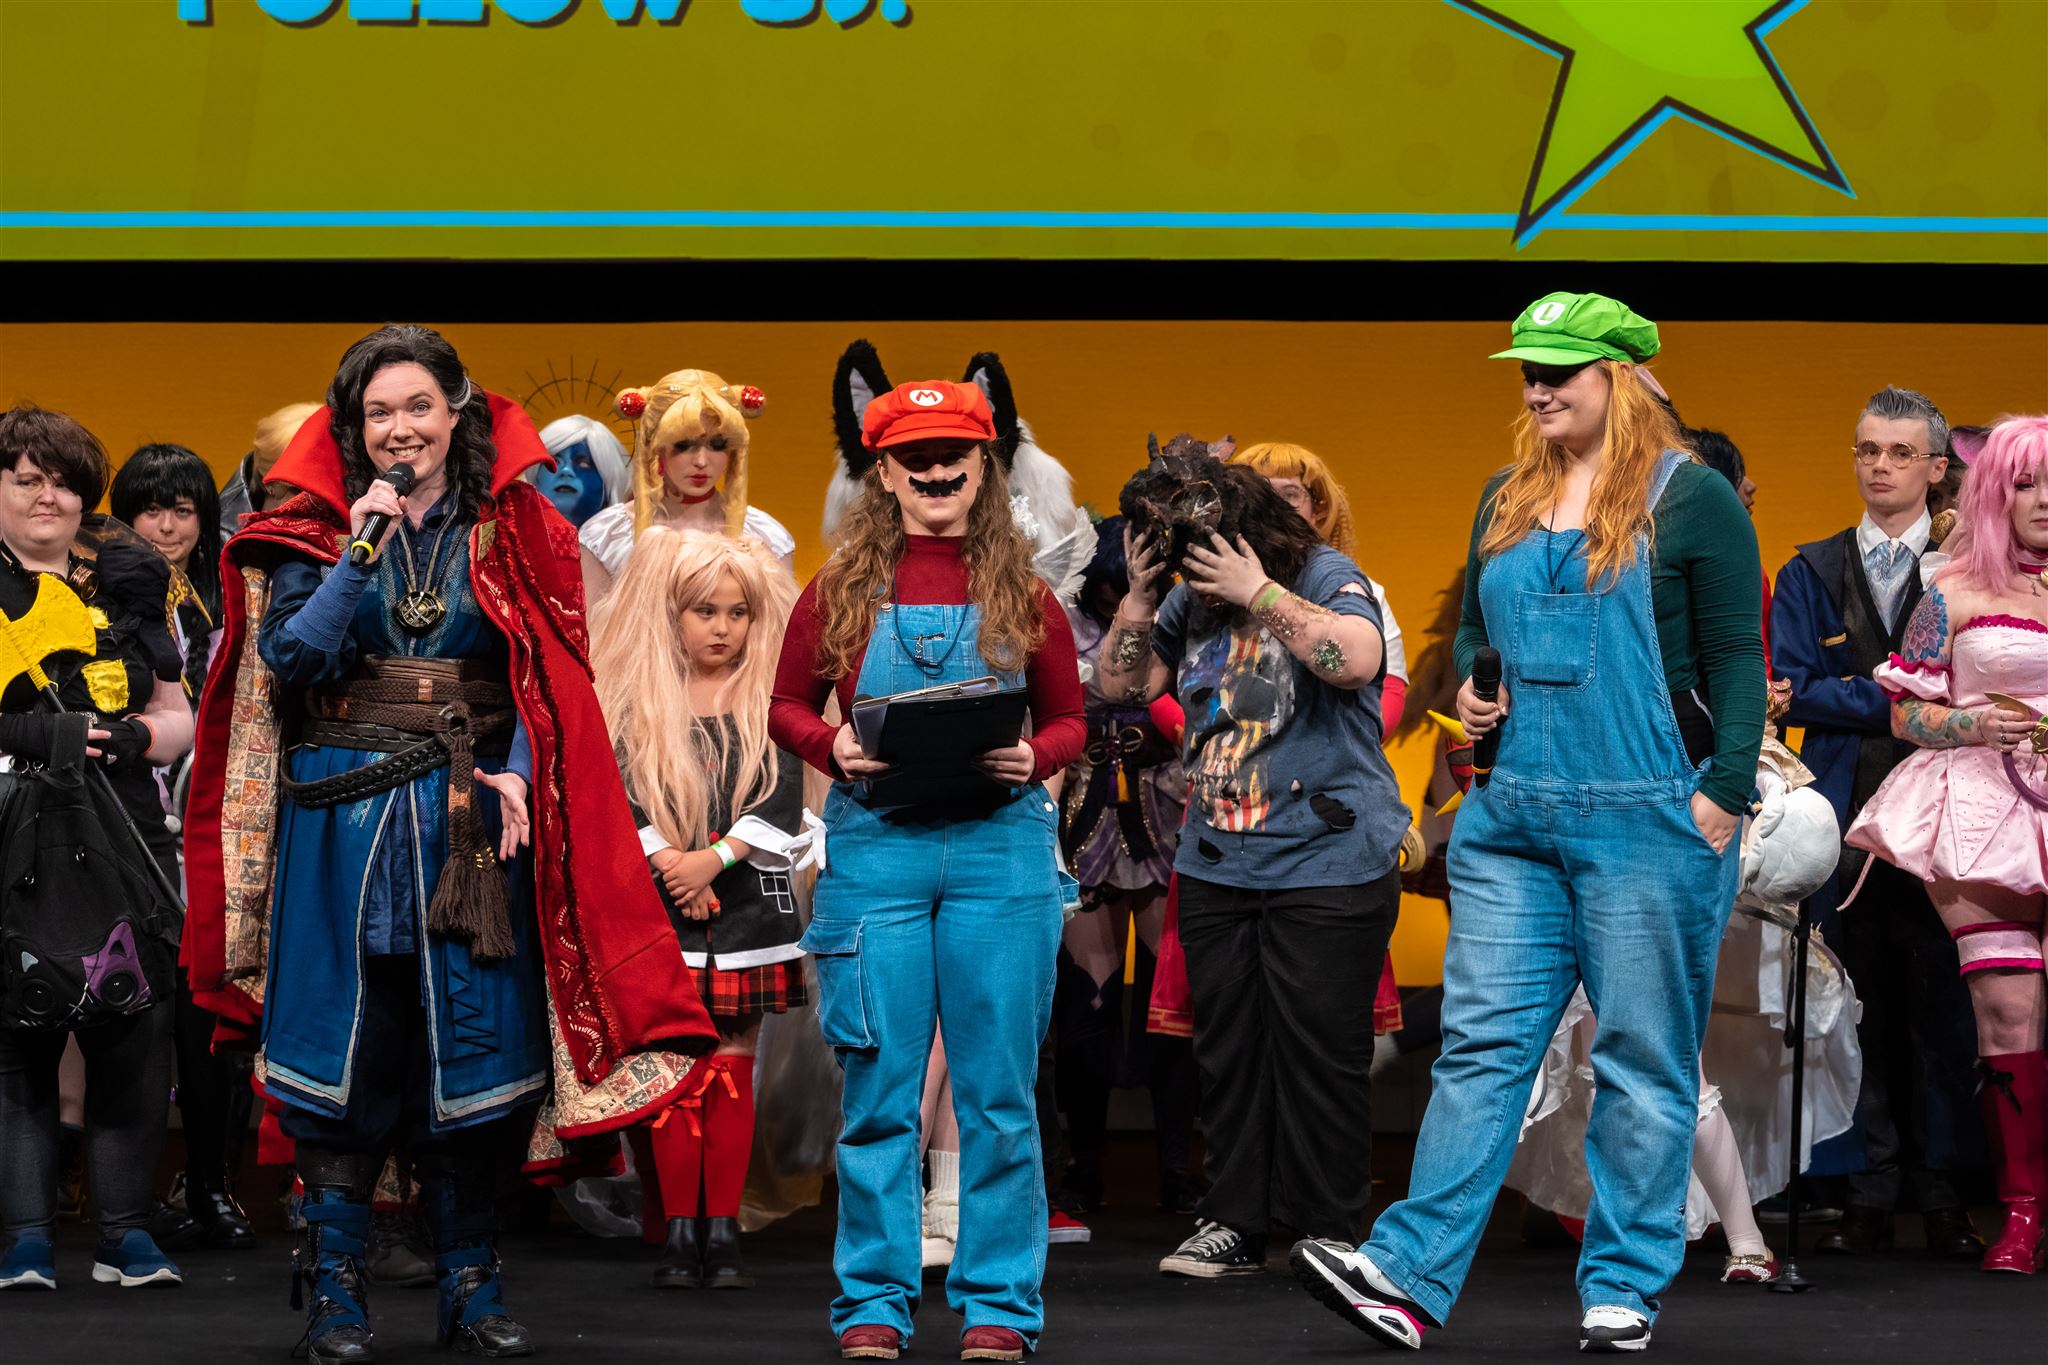 Captain Amelia, Unfortunate Jinx, and Perfect Musix are three white women holding microphones and clipboards. They are dressed as Doctor Strange, Mario, and Luigi.